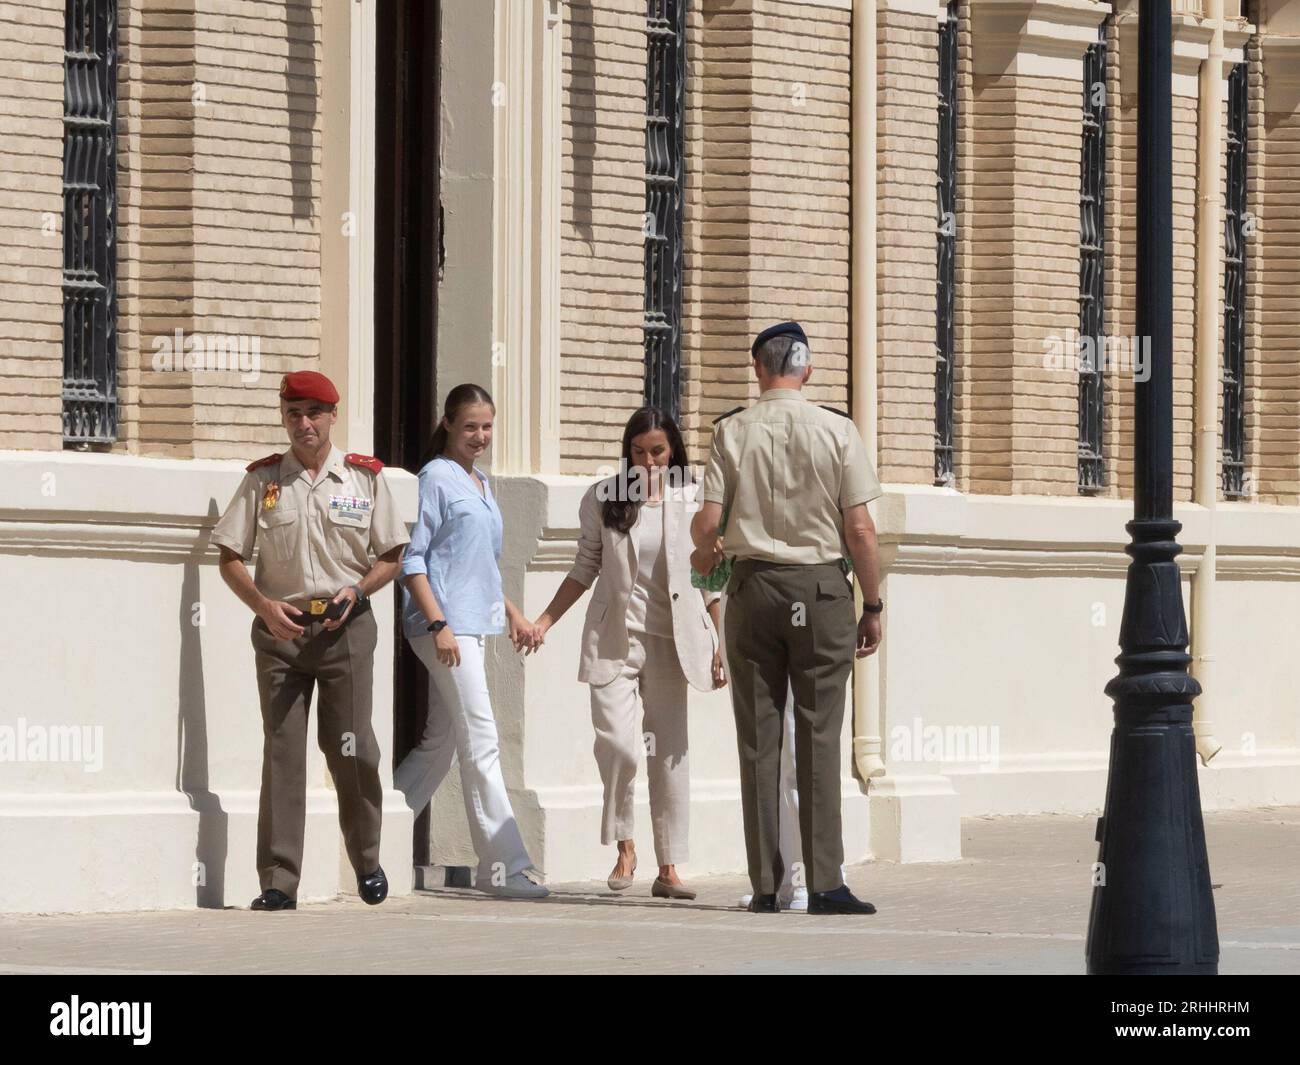 Zaragoza. Spain. 17th August, 2023. Today, the Princess of Asturias, Leonor de Borbón, has joined the Military Academy of Zaragoza to pursue her military studies. She has been accompanied by her parents, the kings of Spain, Felipe de Borbón and Letizia Ortiz, as well as her sister, the Infanta Sofía de Borbón. The princess will spend a year in this academy just like her father and grandfather did. Juan Antonio Perez/Alamy Live News Stock Photo